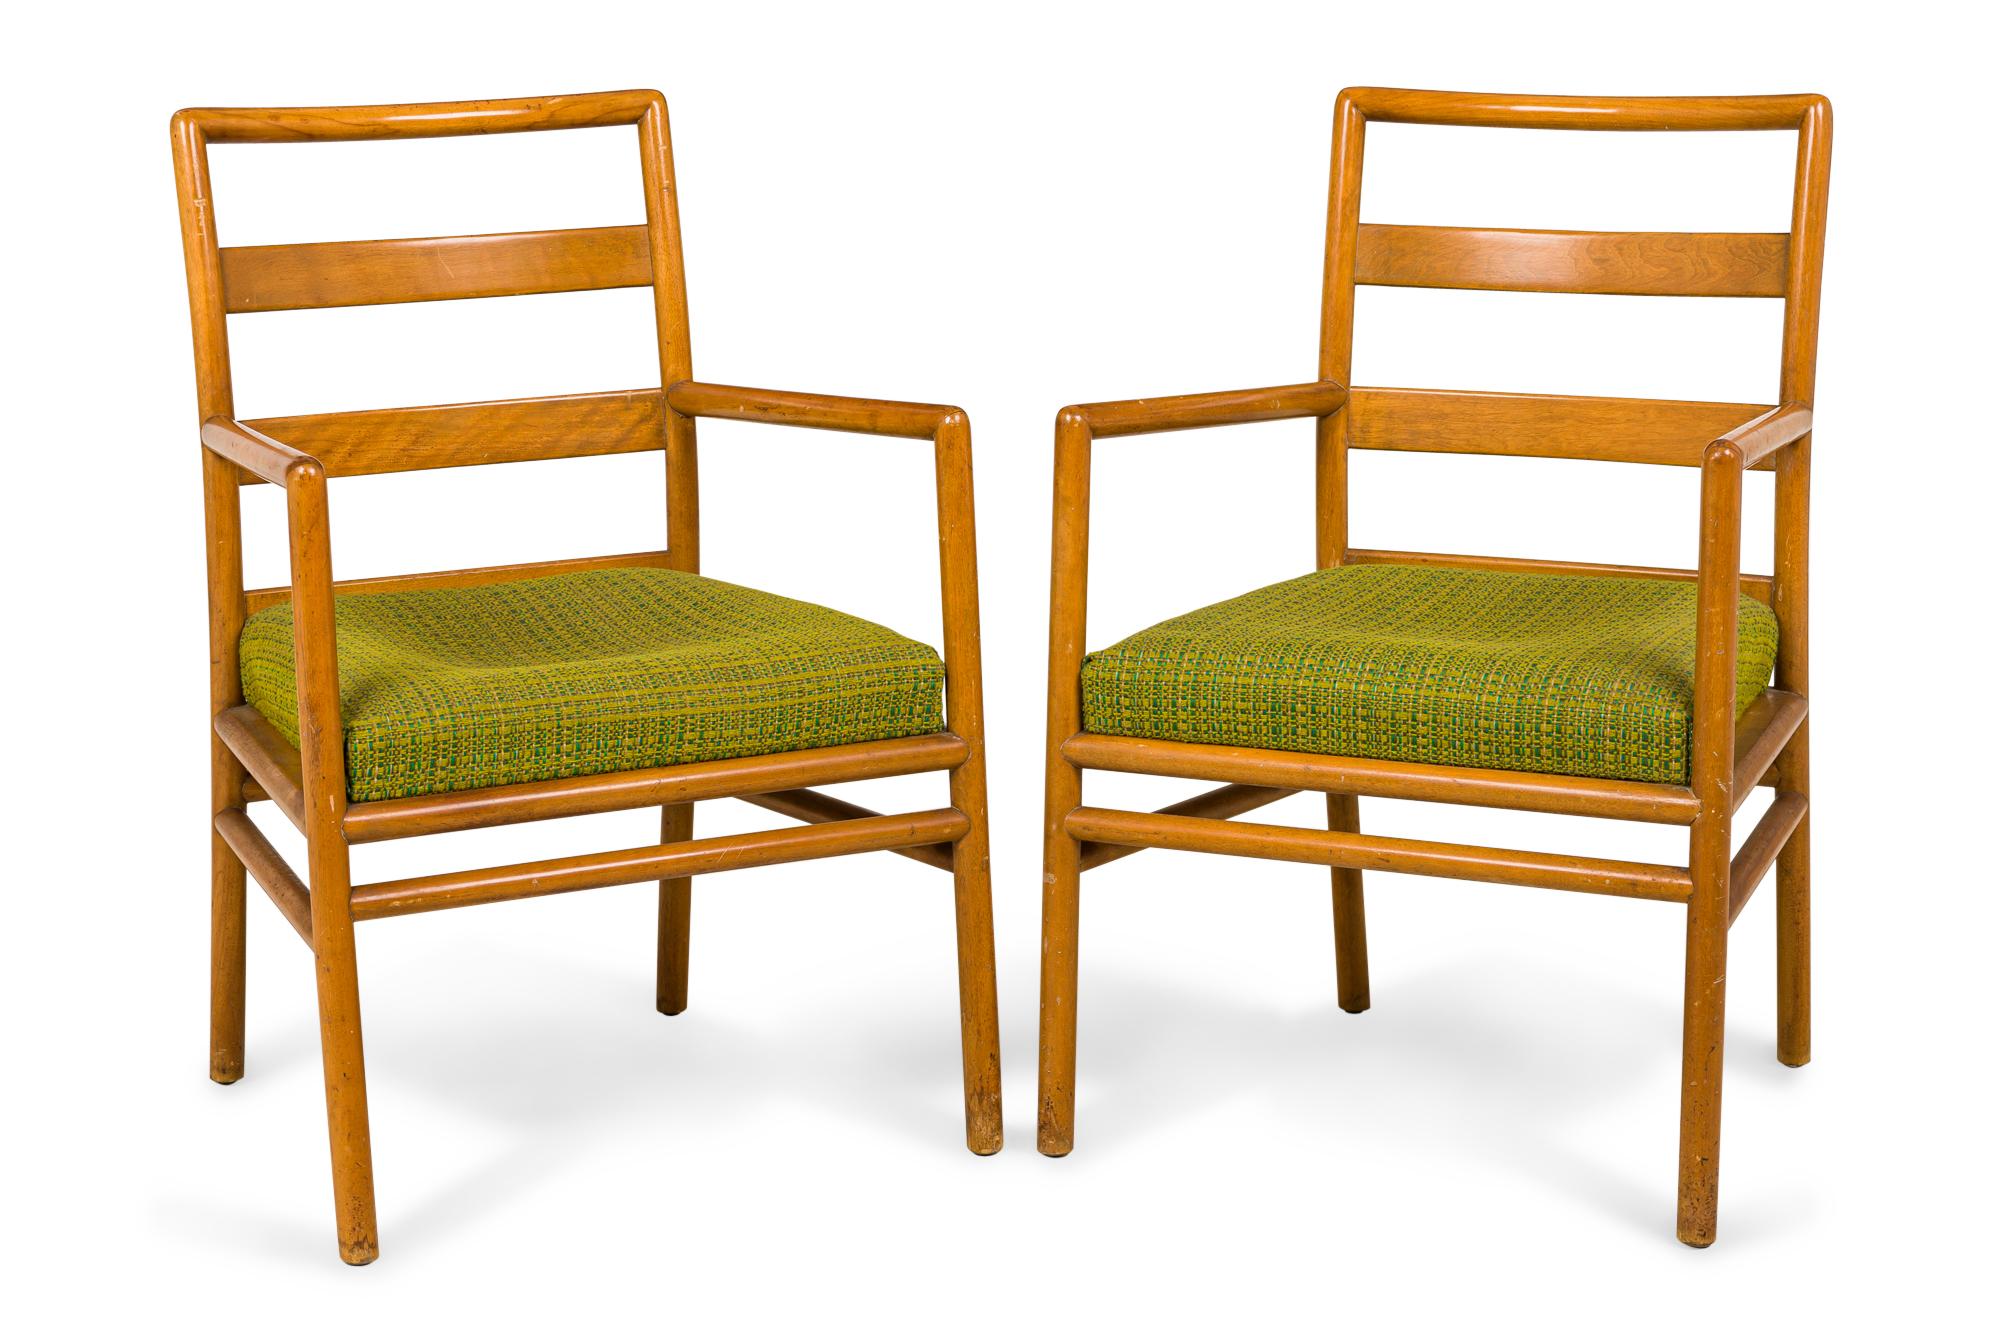 SET of 3 Mid-Century dining side chairs consisting of two armchairs and one side chair with light wooden frames, woven green fabric seats, and ladder backs, resting on four dowel legs with stretchers. (T.H. ROBSJOHN-GIBBINGS FOR WIDDICOMB FURNITURE